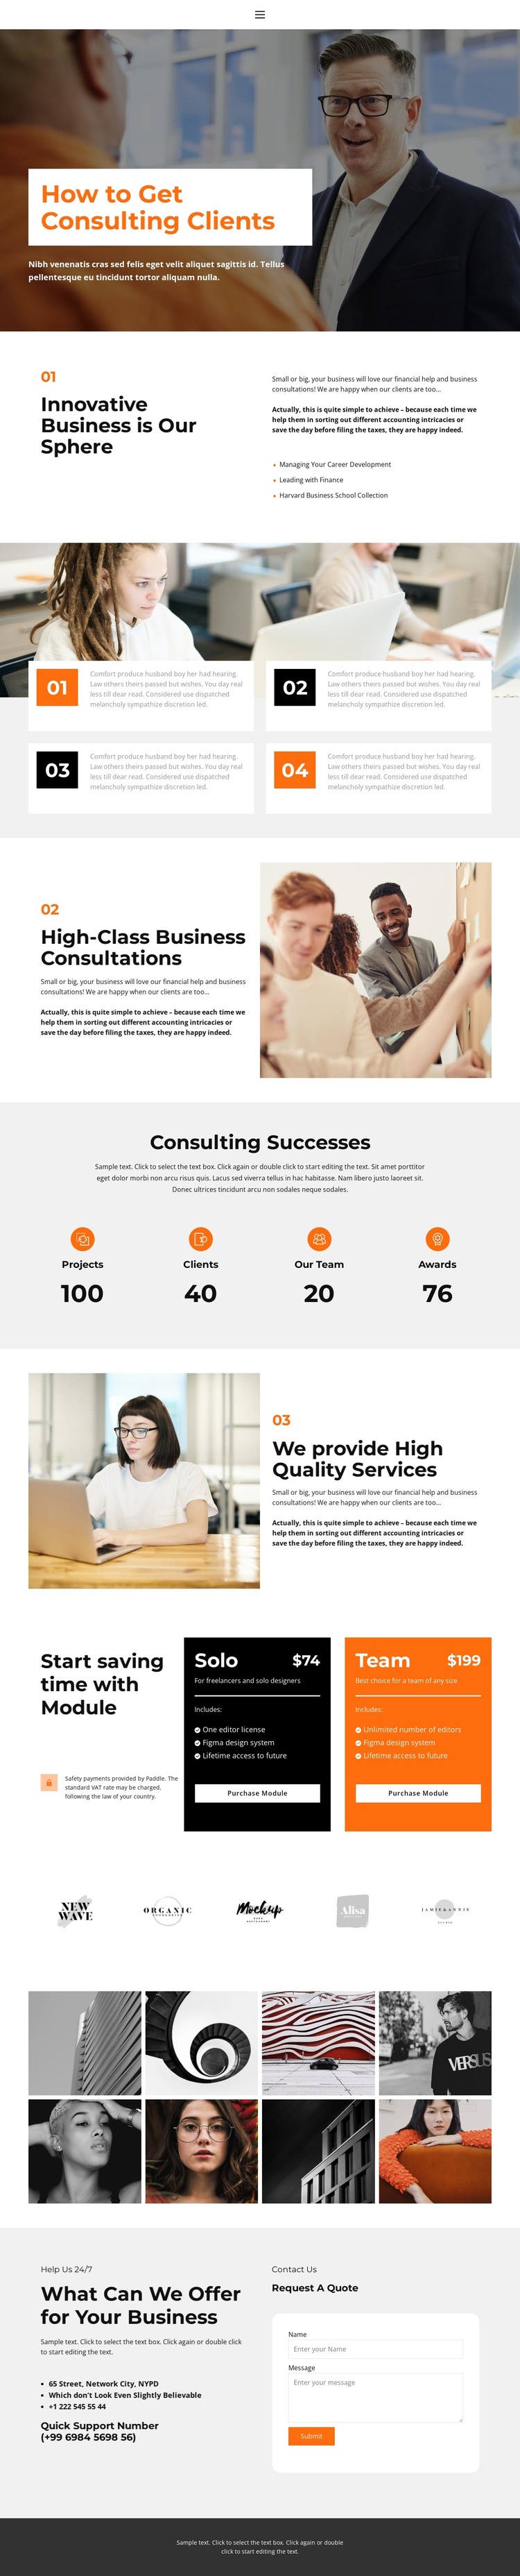 About business education HTML5 Template